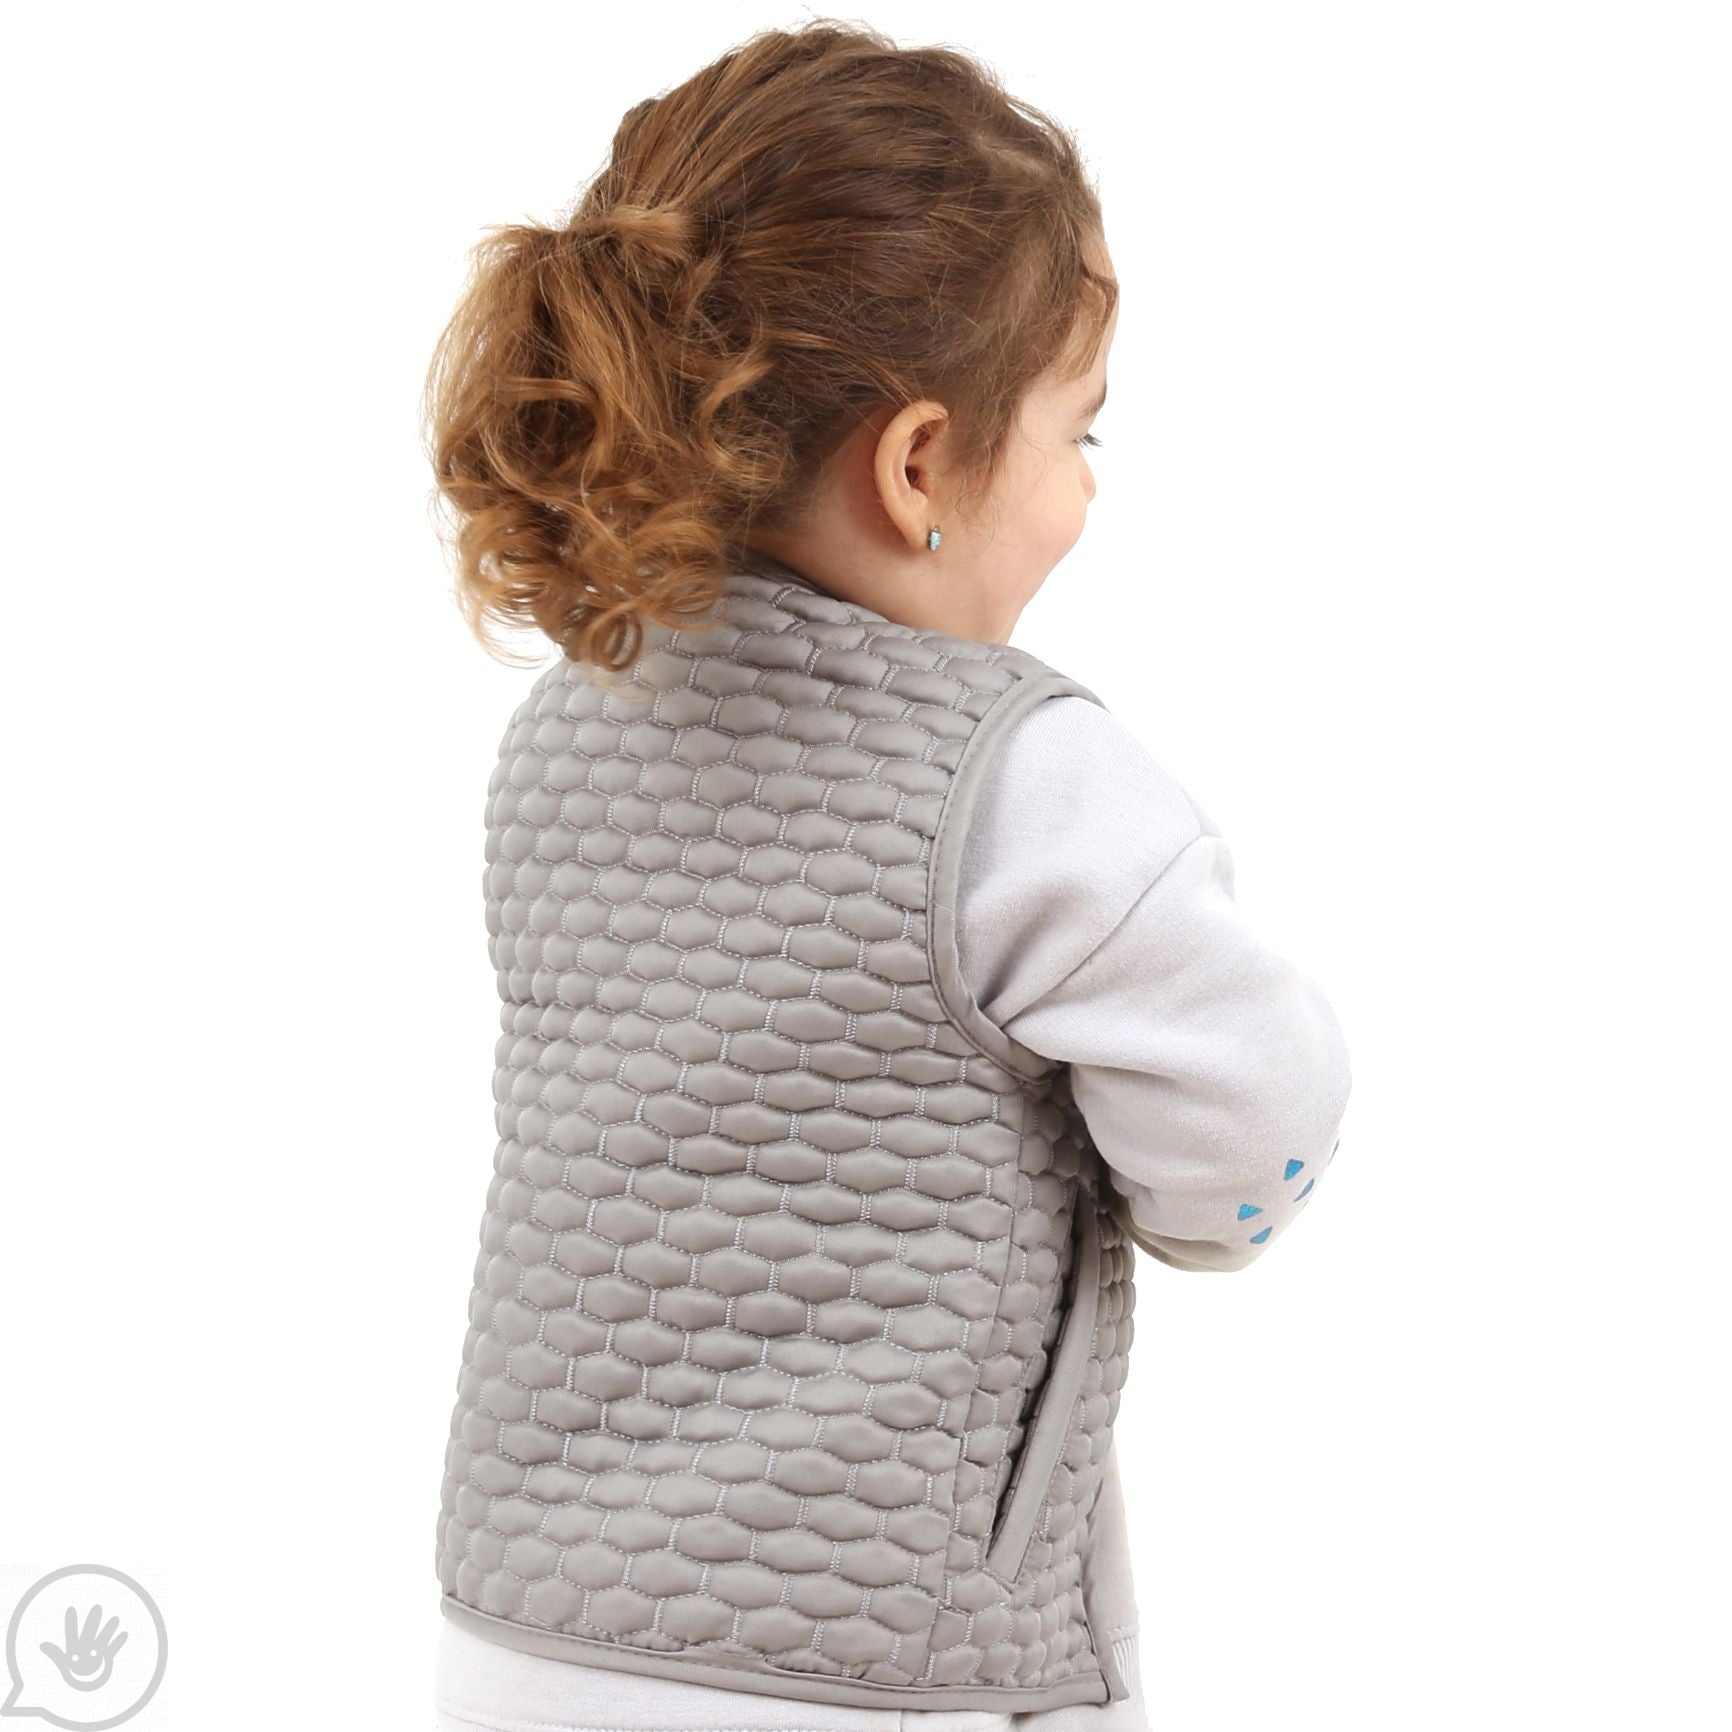 A child with light skin tone and a curly brown pony tail stands with their back to the camera to show the backside of the Kids Honeycomb Weighted Vest.